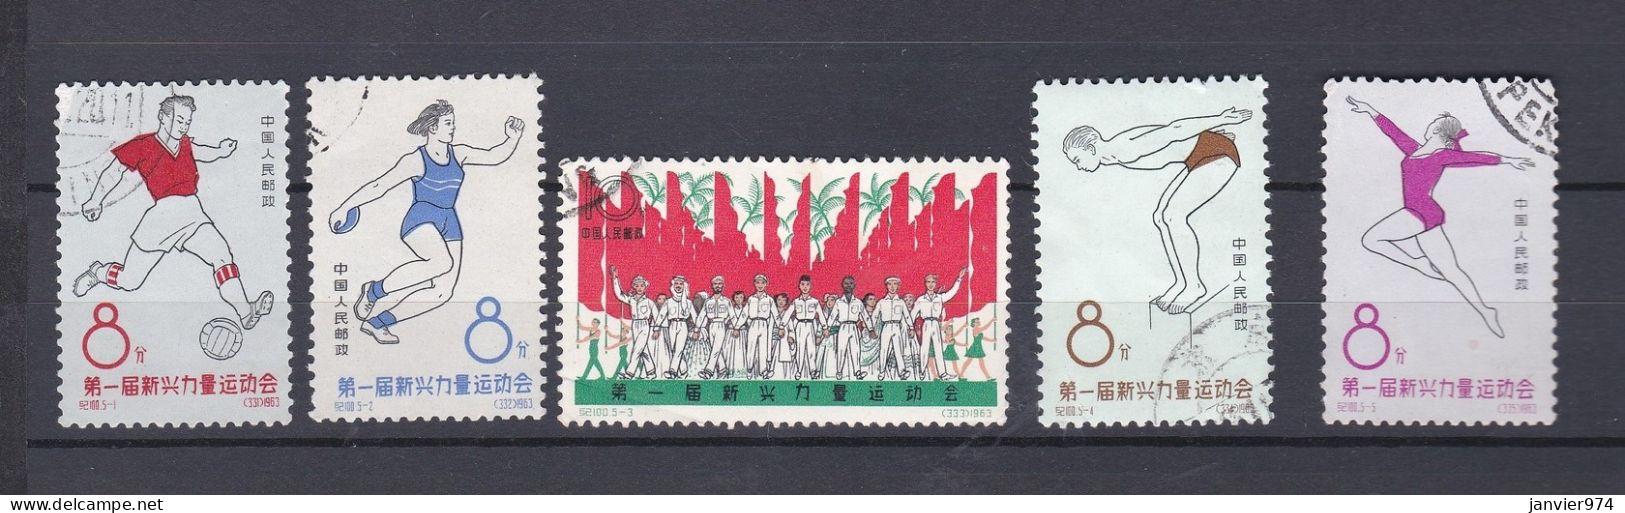 Chine 1963 La Série Complète GANEFO Athletic Games, 5 Timbres. Scan Recto Verso - Used Stamps